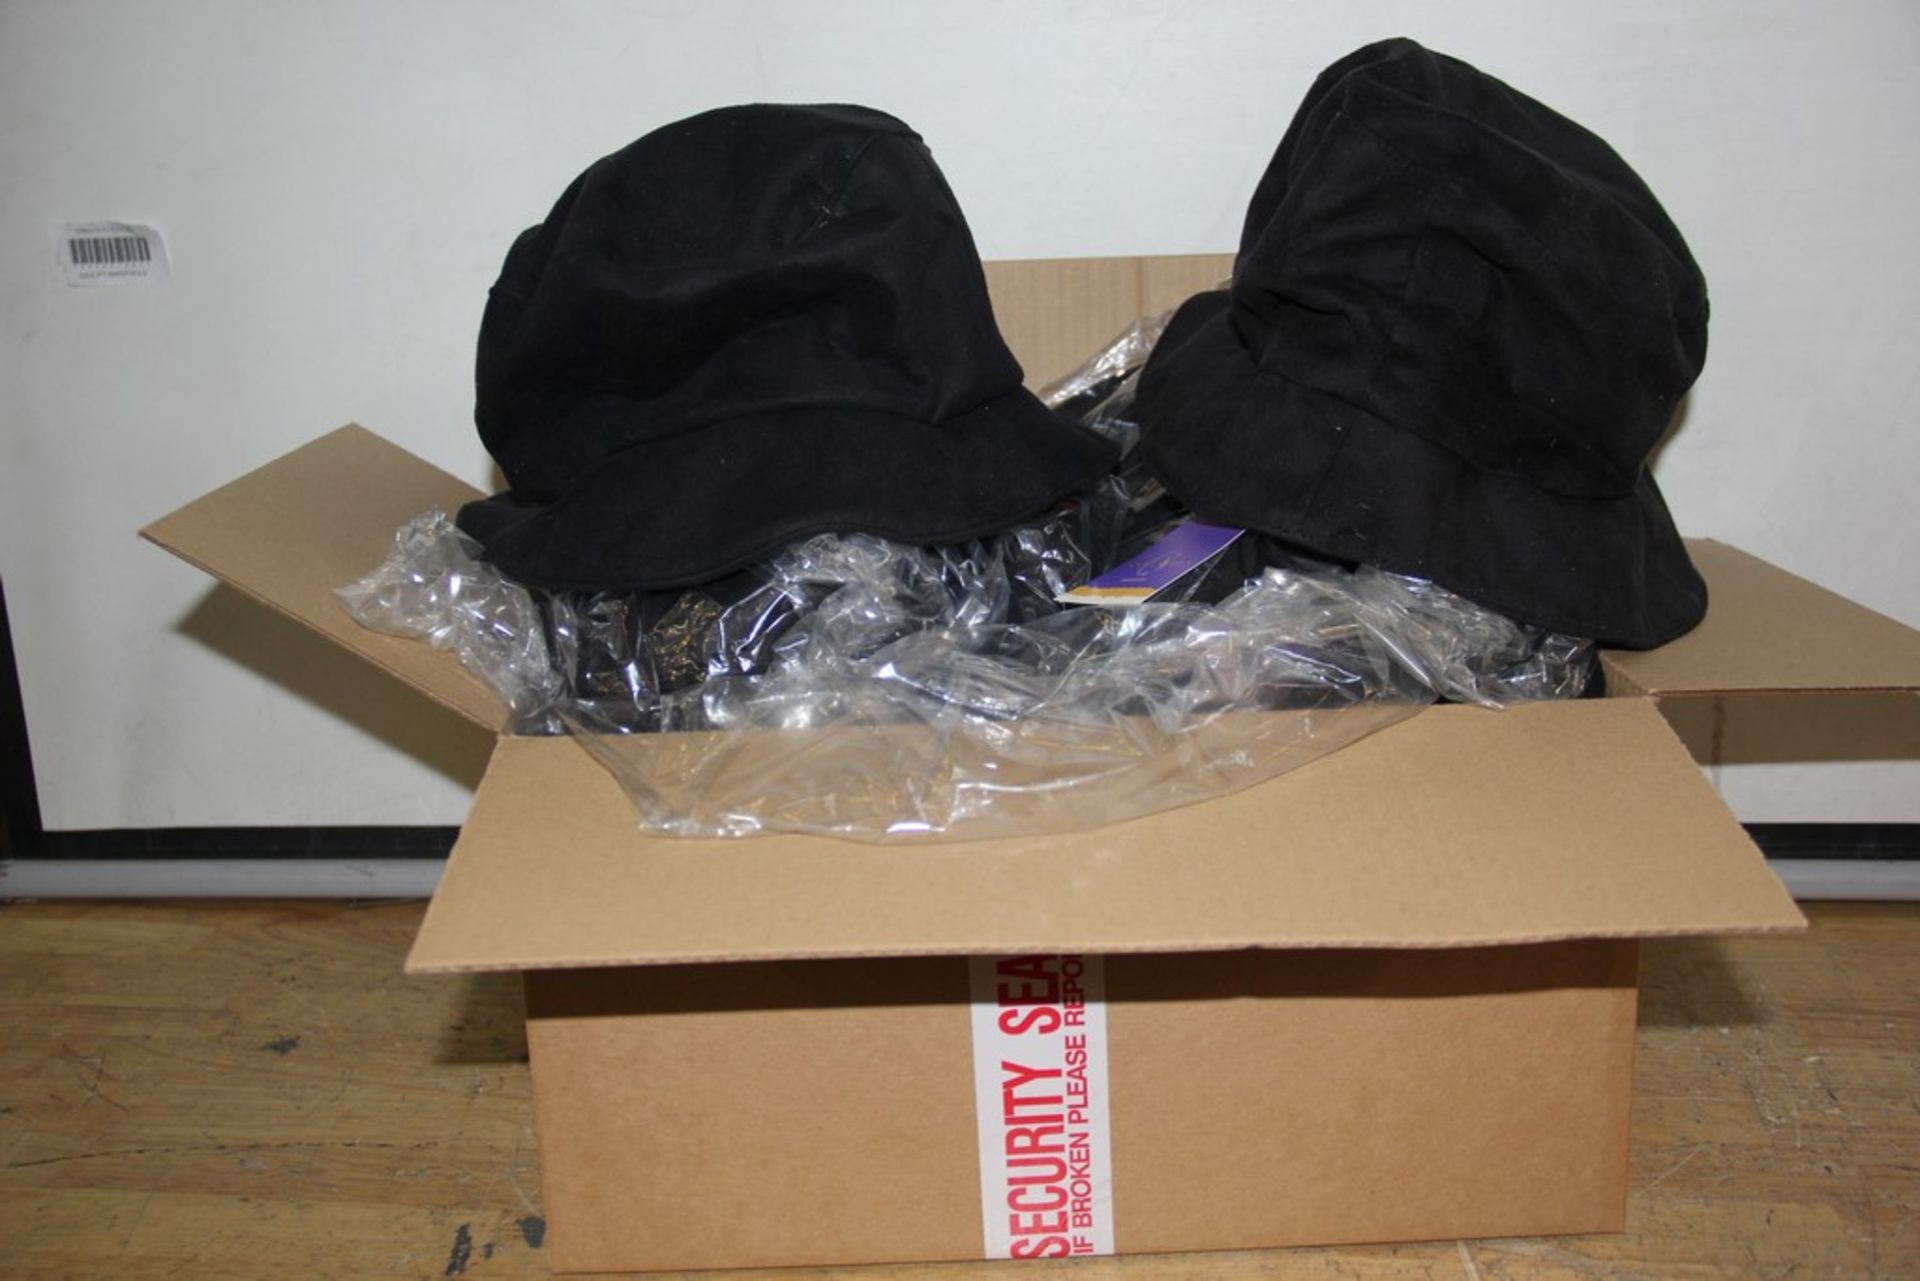 11X MIXED HATS INCLUDING MARKSON / GRADE: BRAND NEW (DC2) {AISLE 18}